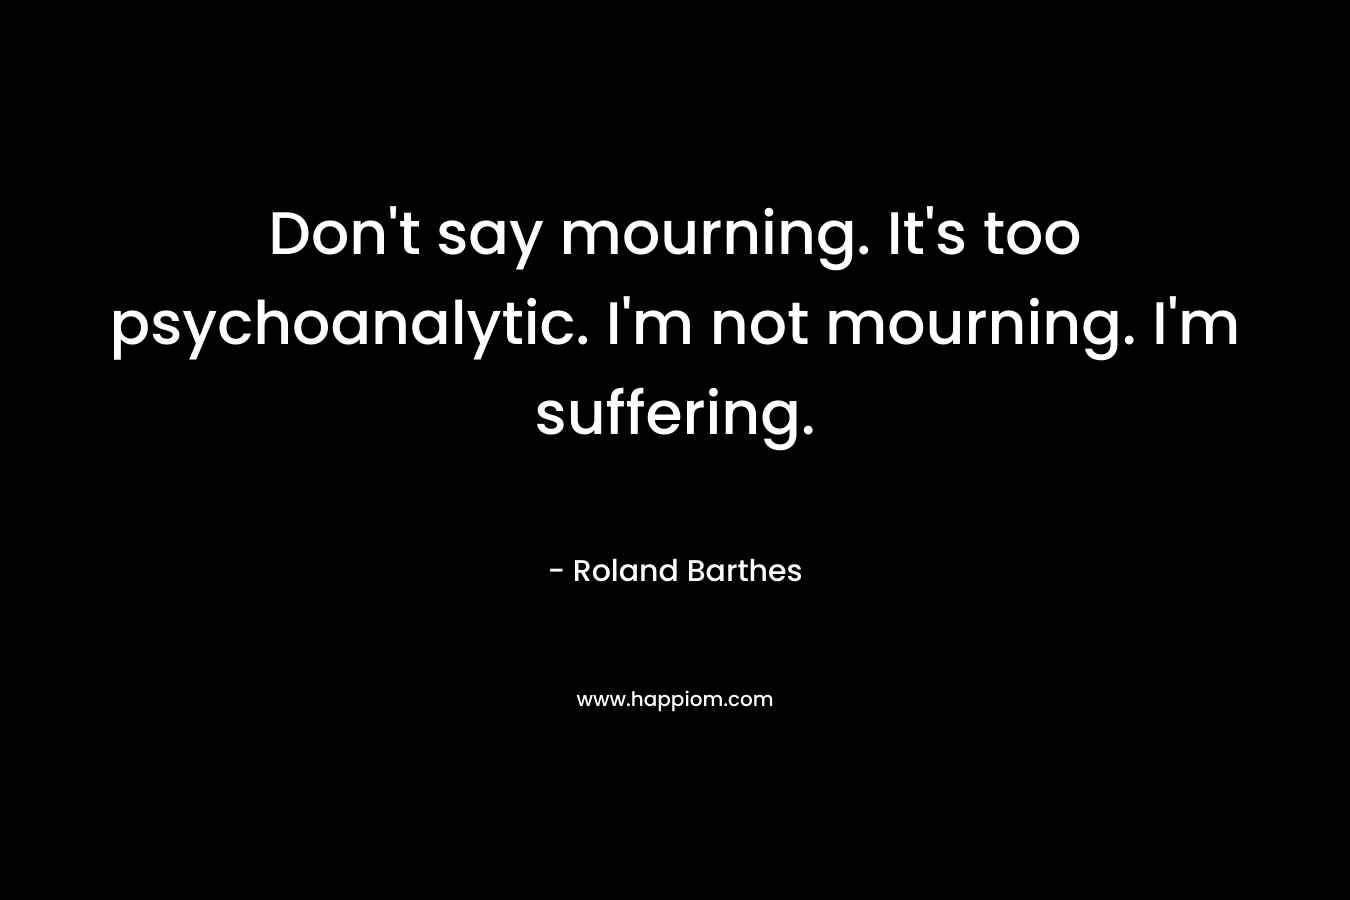 Don't say mourning. It's too psychoanalytic. I'm not mourning. I'm suffering.